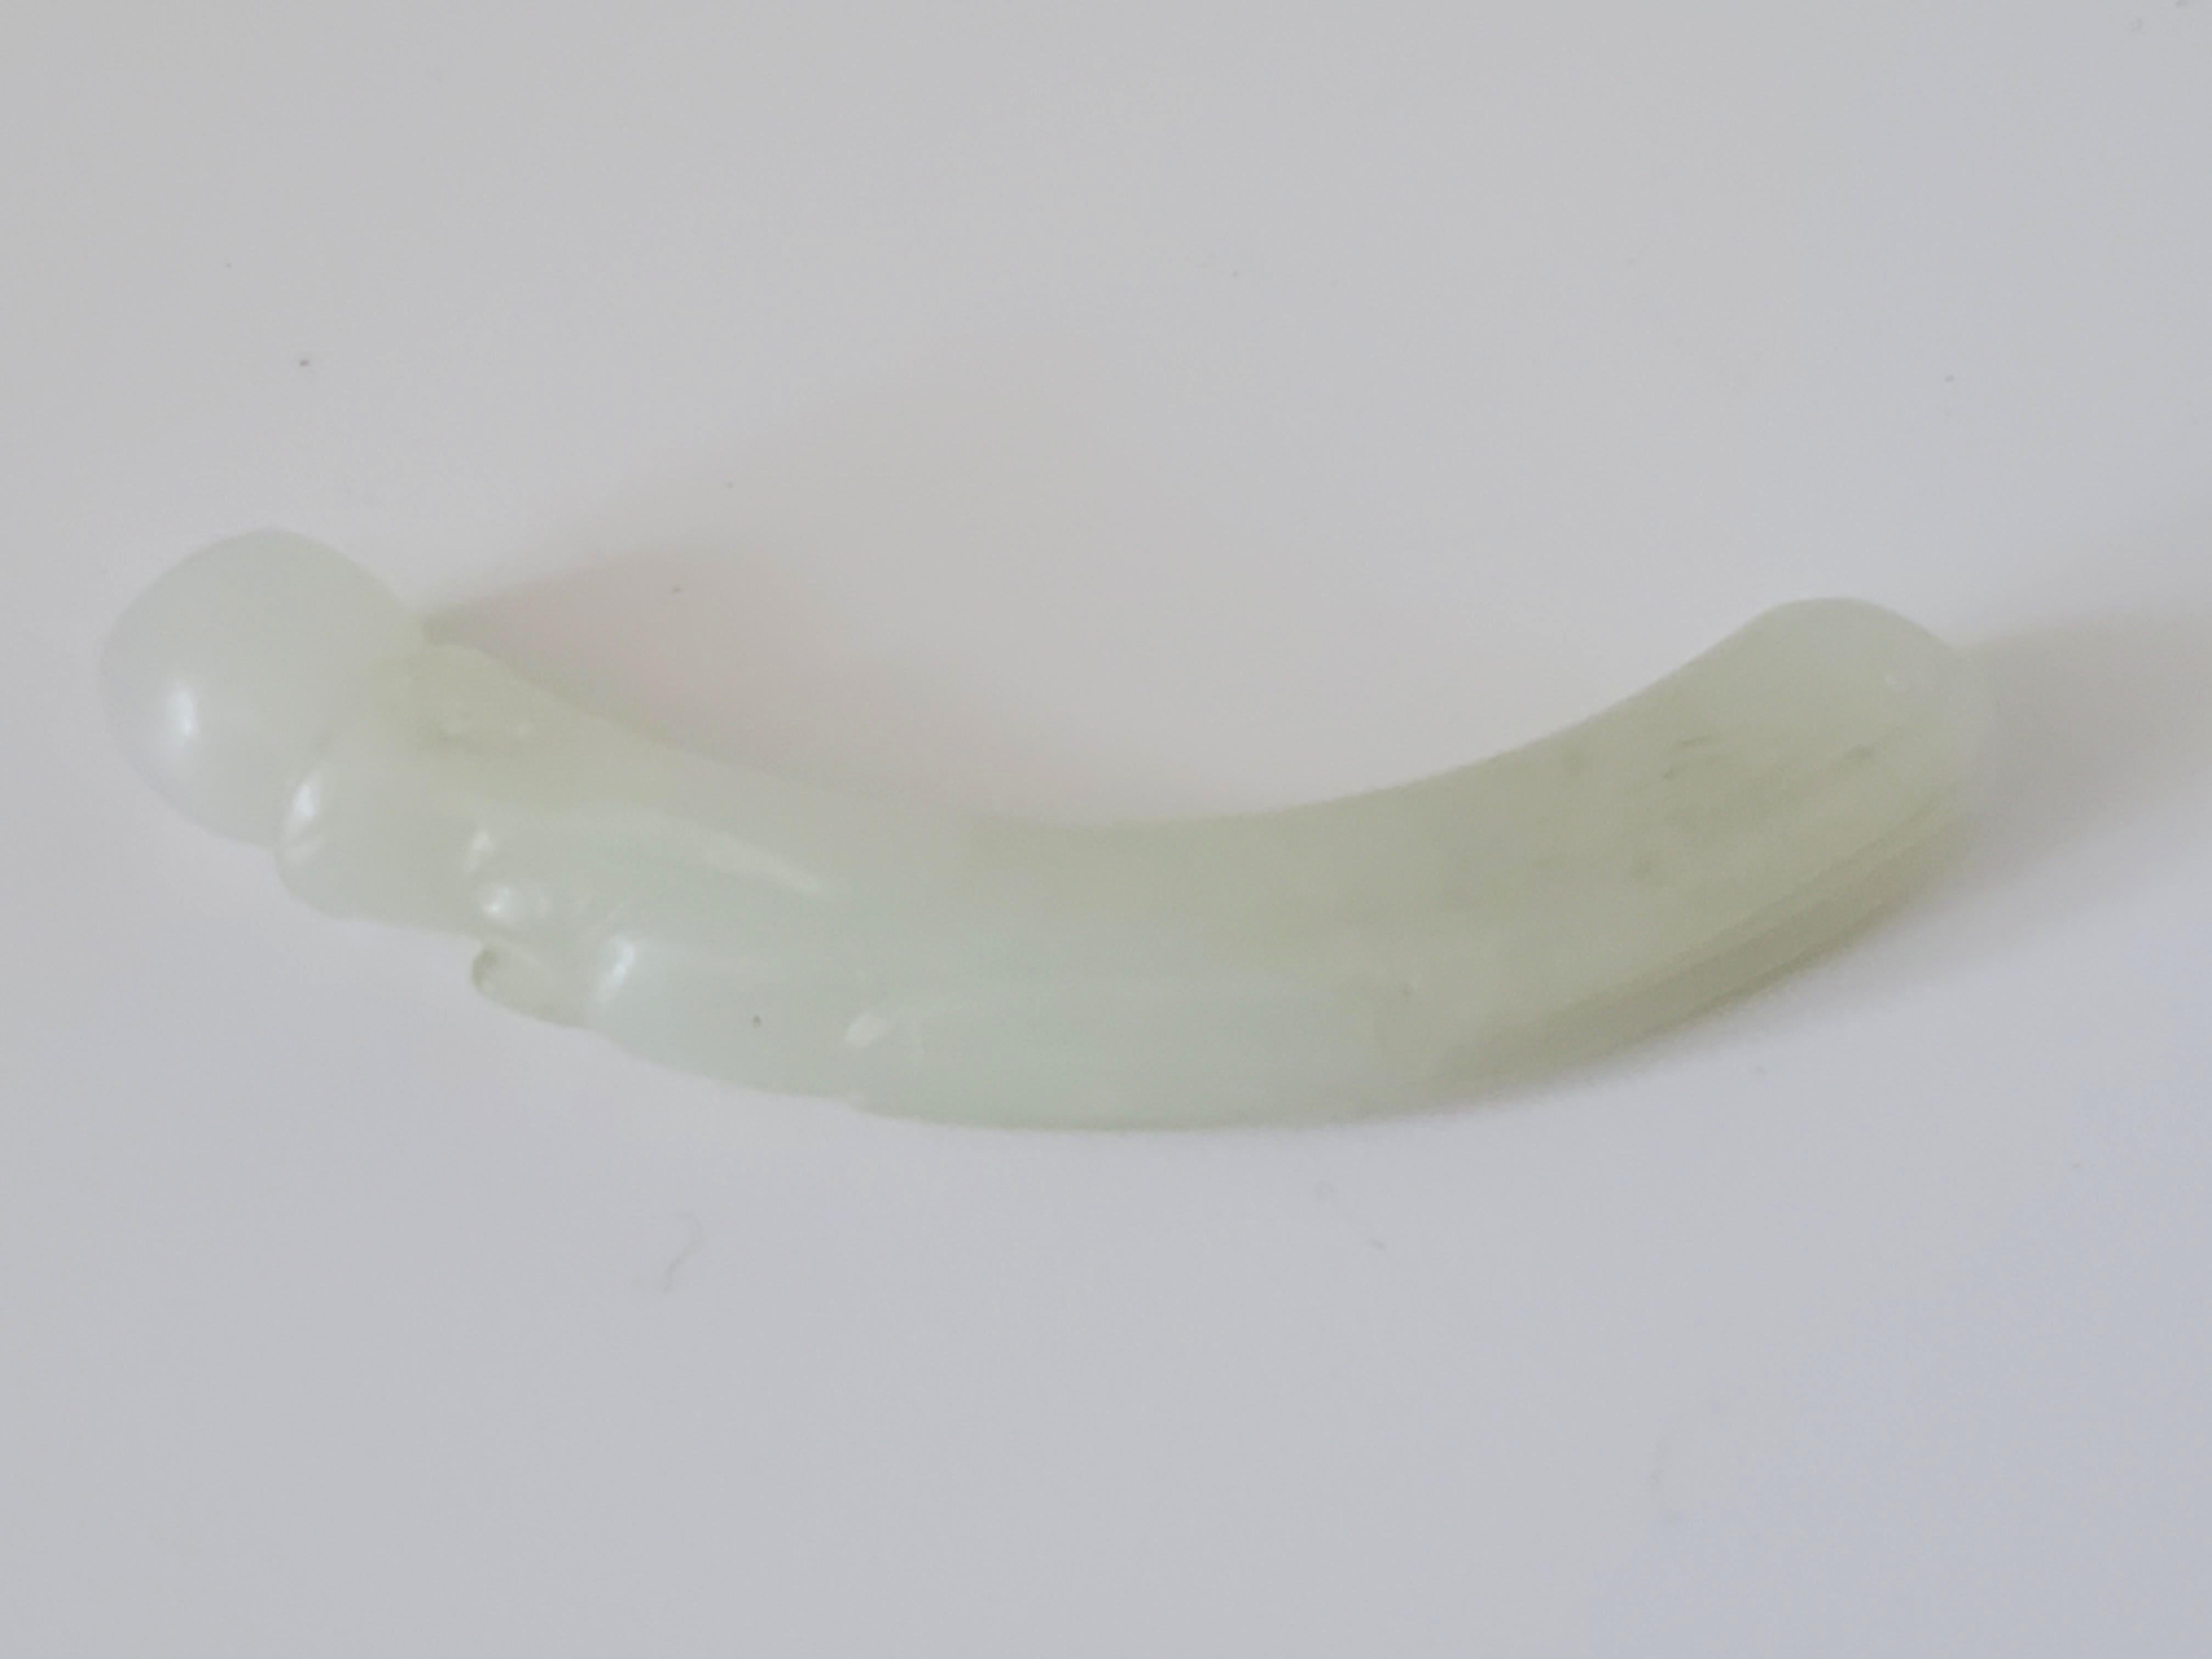 This antique Qing Dynasty nephrite jade pendant consists of a dragon with a pearl in its mouth. There is decorative etching on the body, and the head and mouth are well defined. The pendant has a semi-fine texture with a semi-gloss or slightly waxy